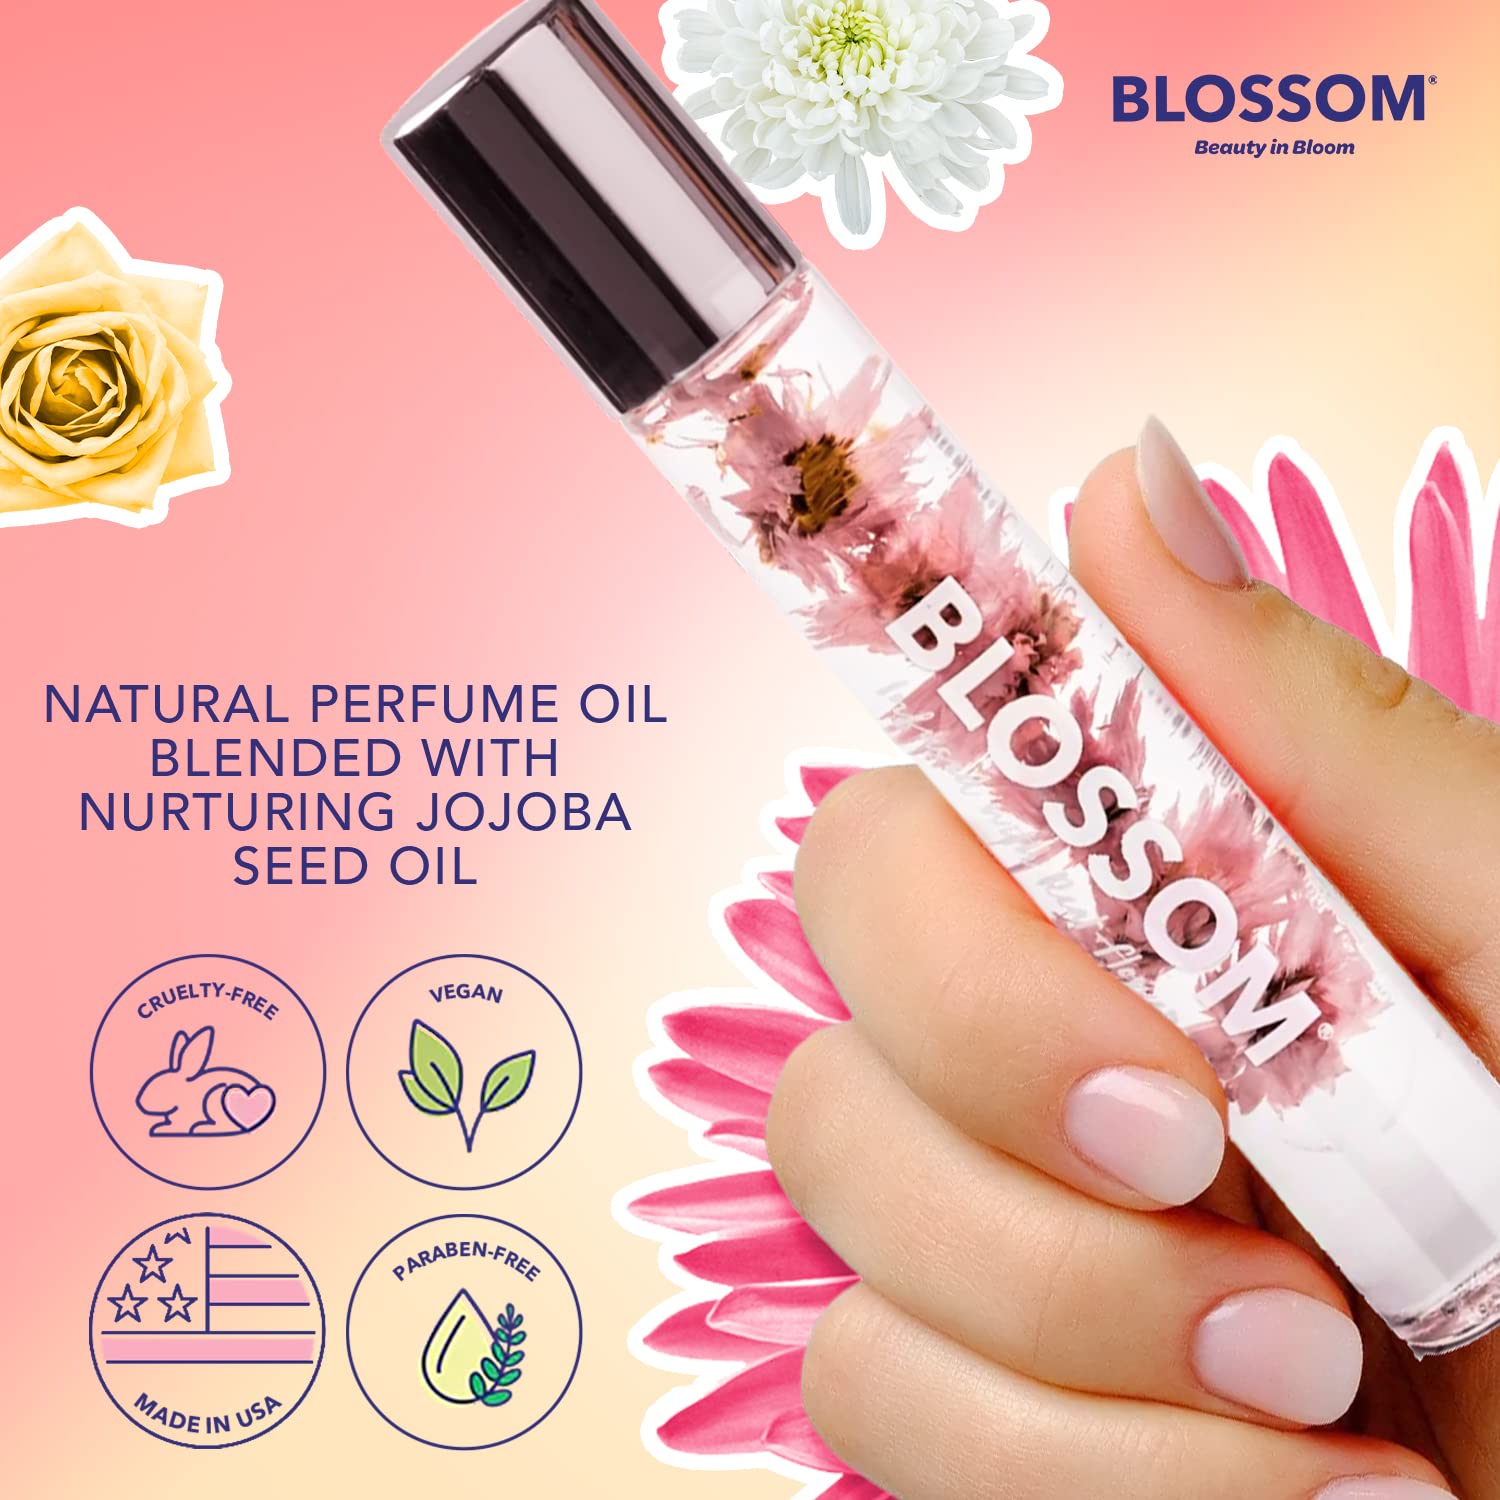 Blossom Hydrating, Scented Cuticle Oil + All Natural Rollerball Perfume Oil, Made in USA, Infused with Real Flowers, 2 Pack Bundle, Rose/Patchouli Rose